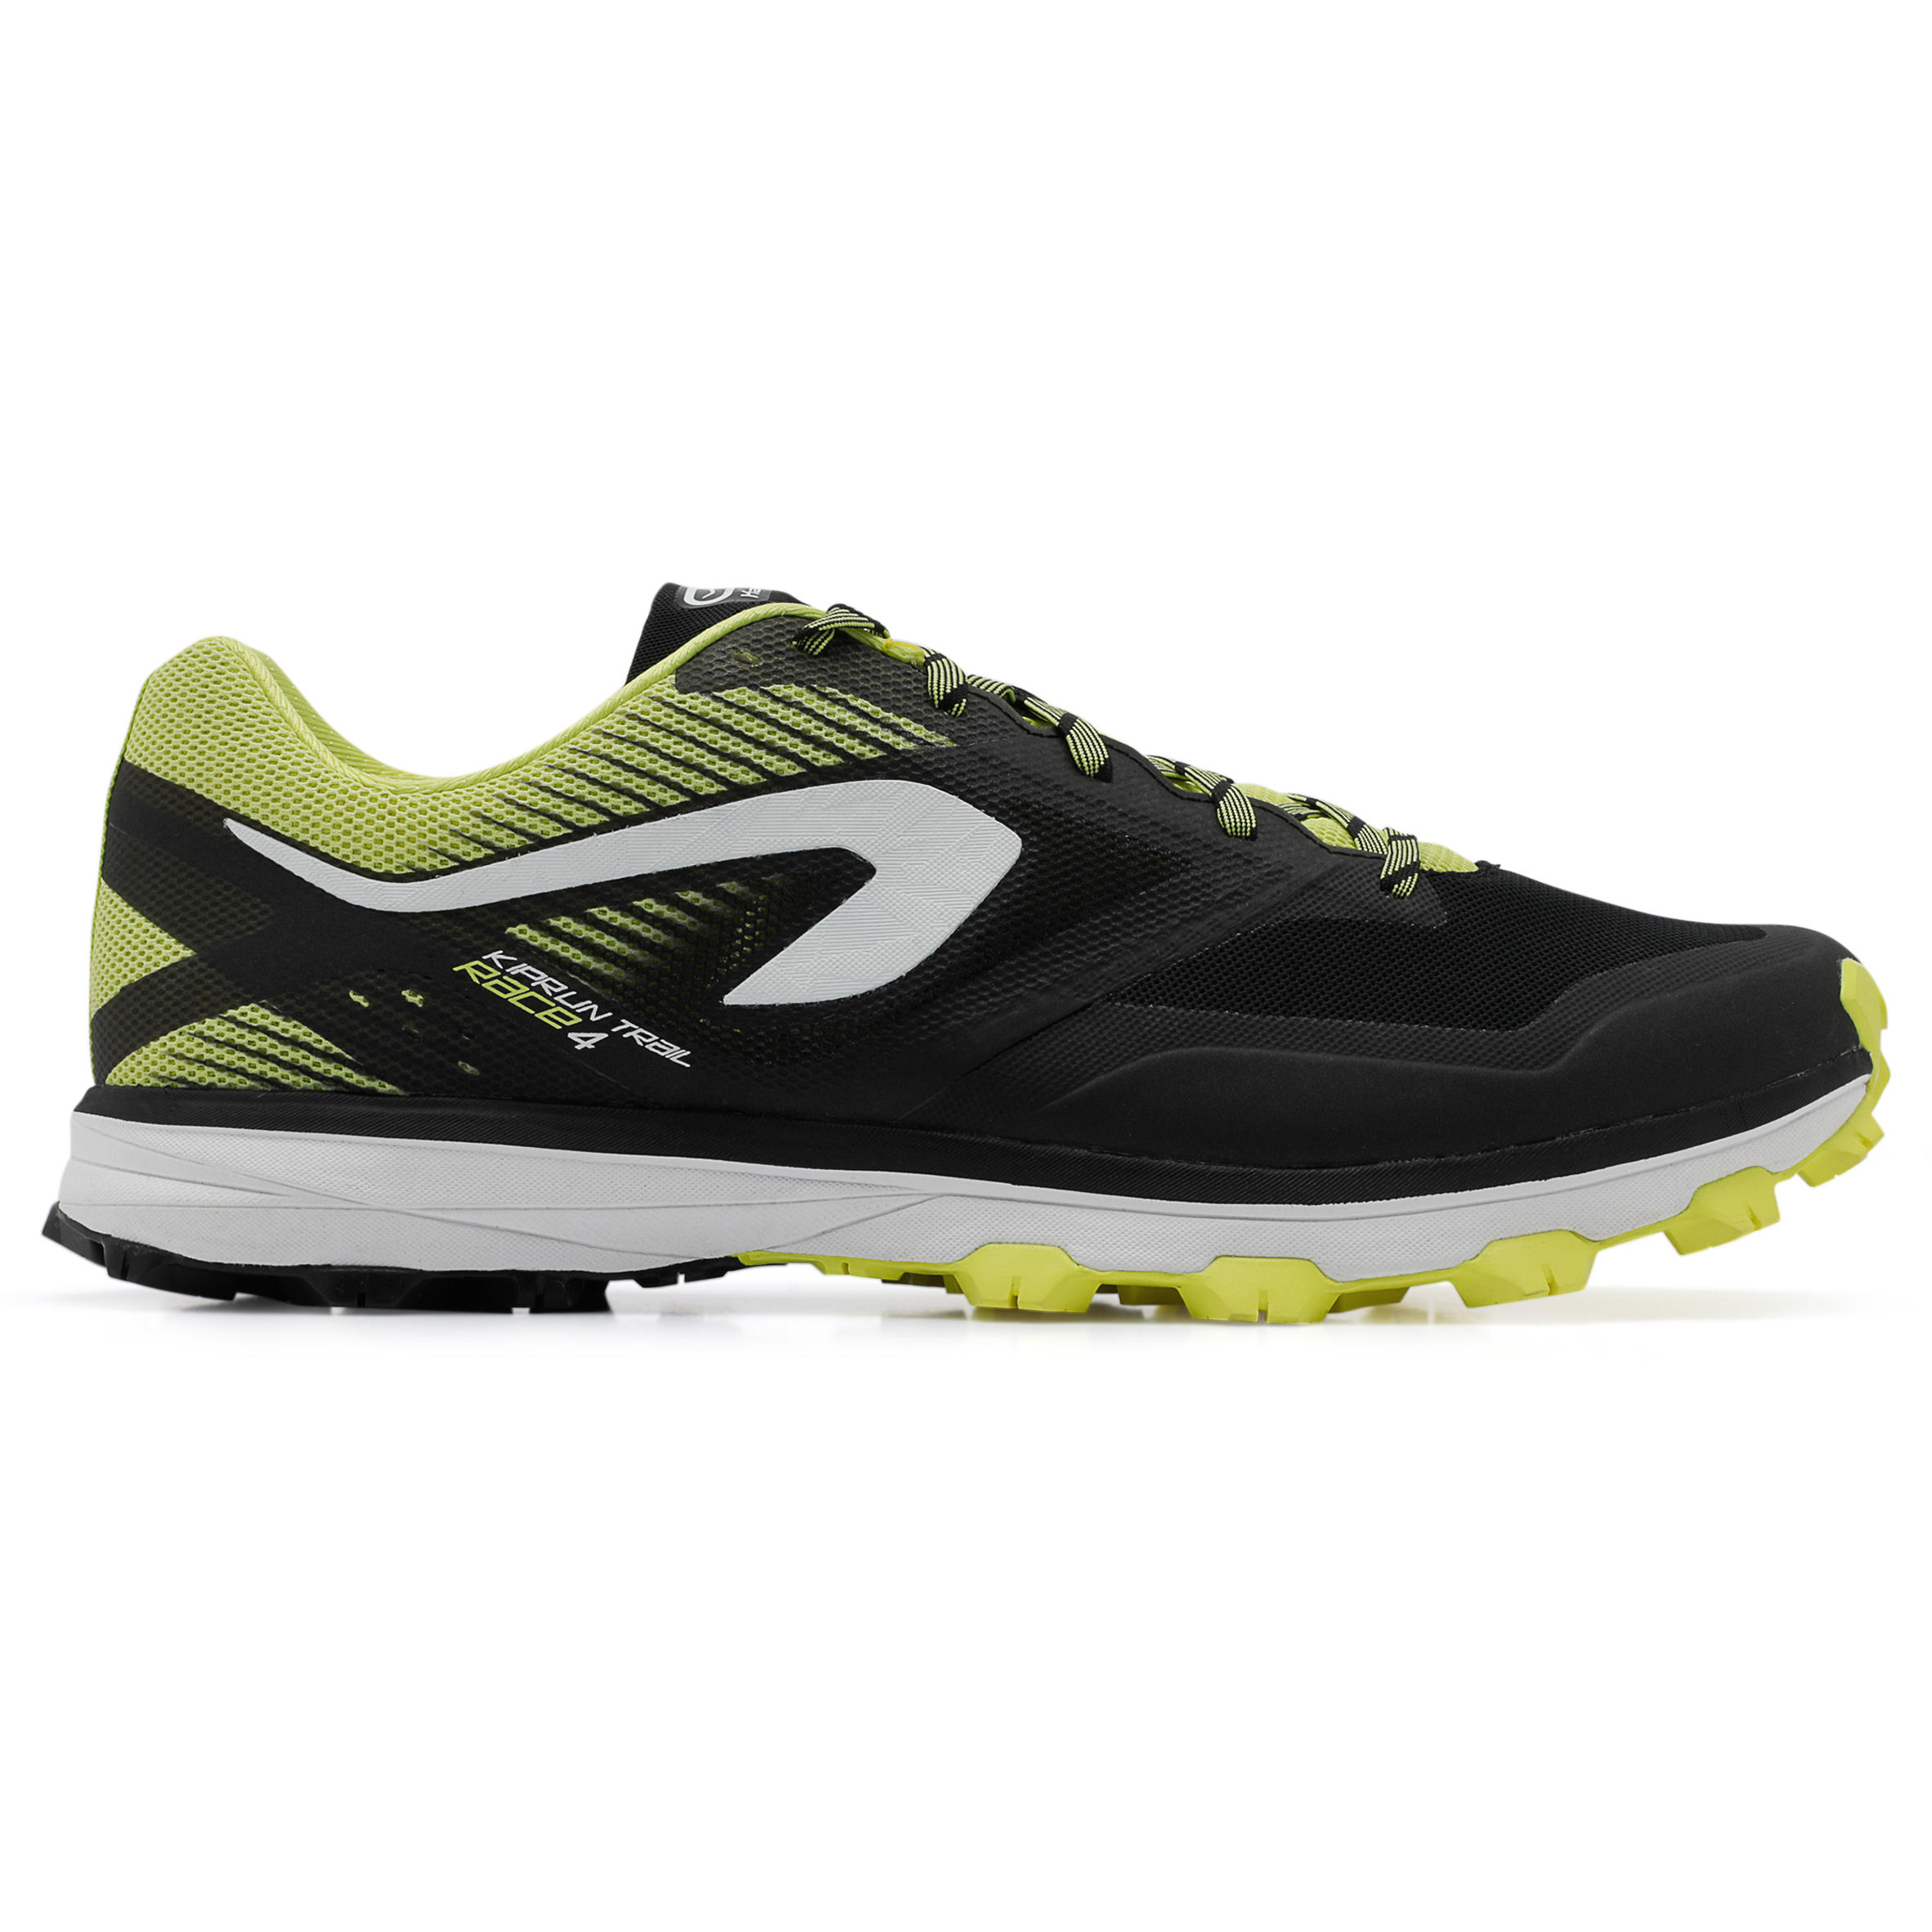 TRAIL RUNNING SHOES - BLACK/YELLOW